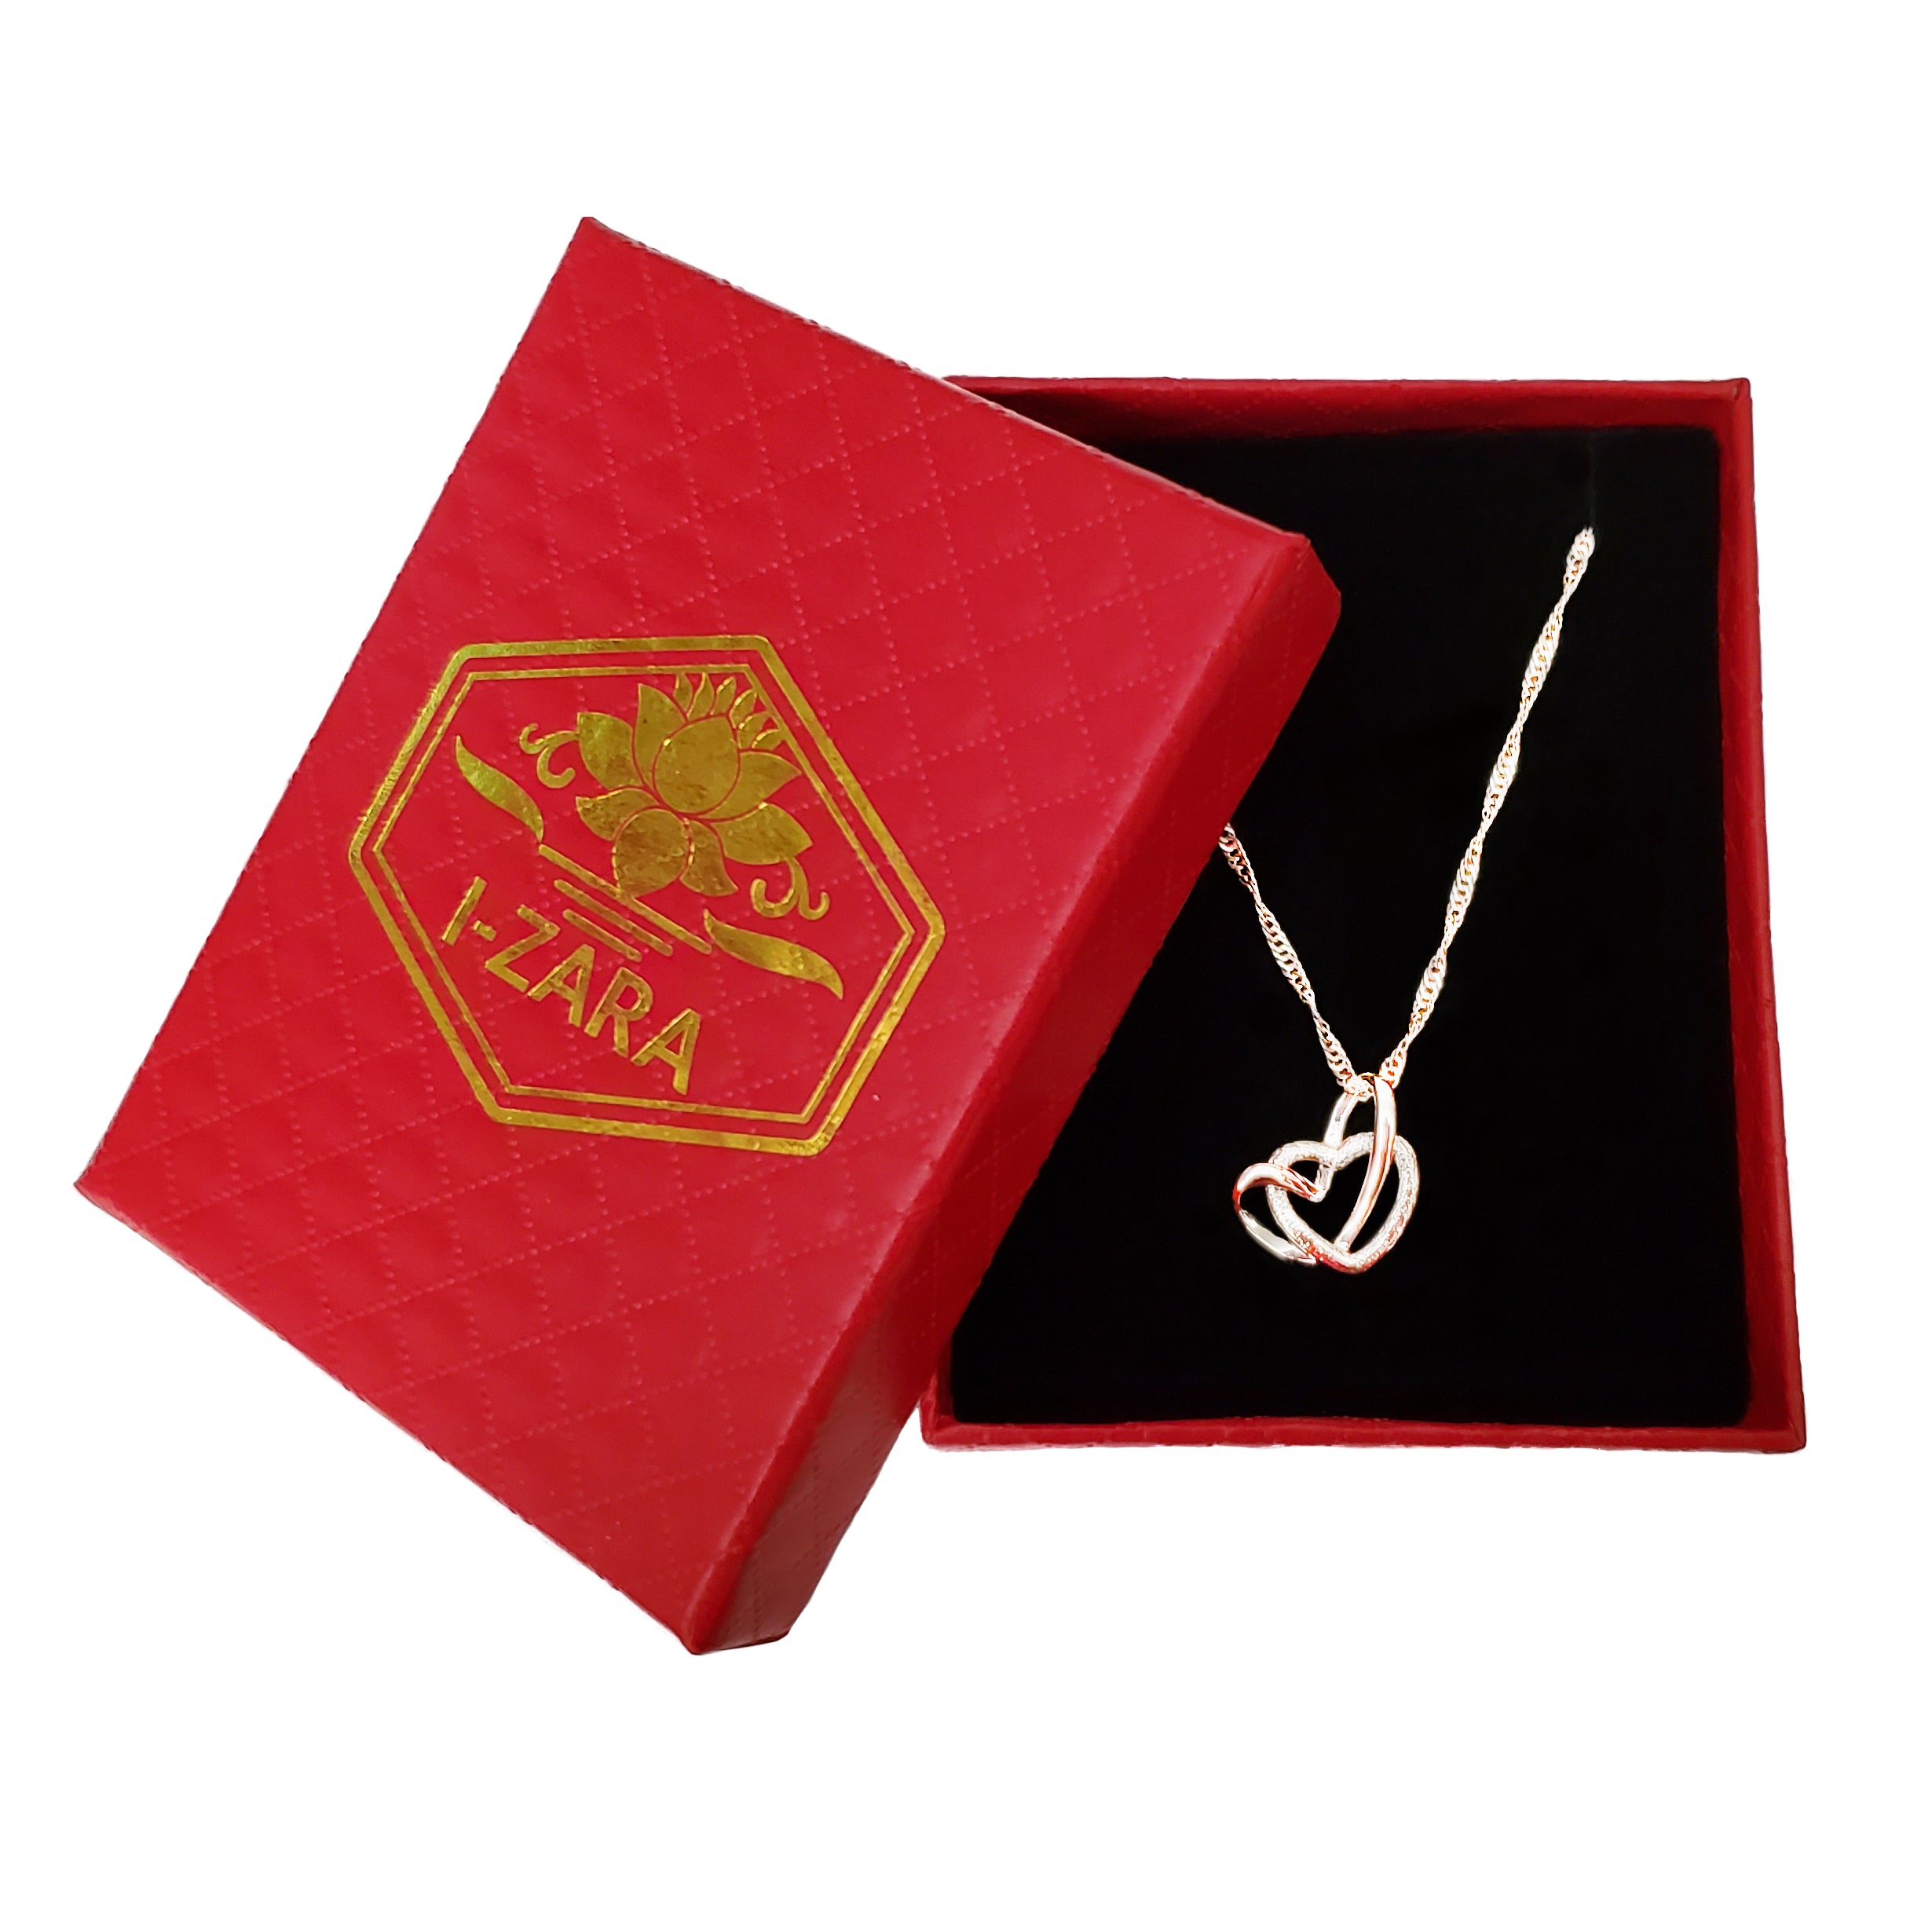 Women's Classic Great Quality 18K White Gold Double Heart Pendant